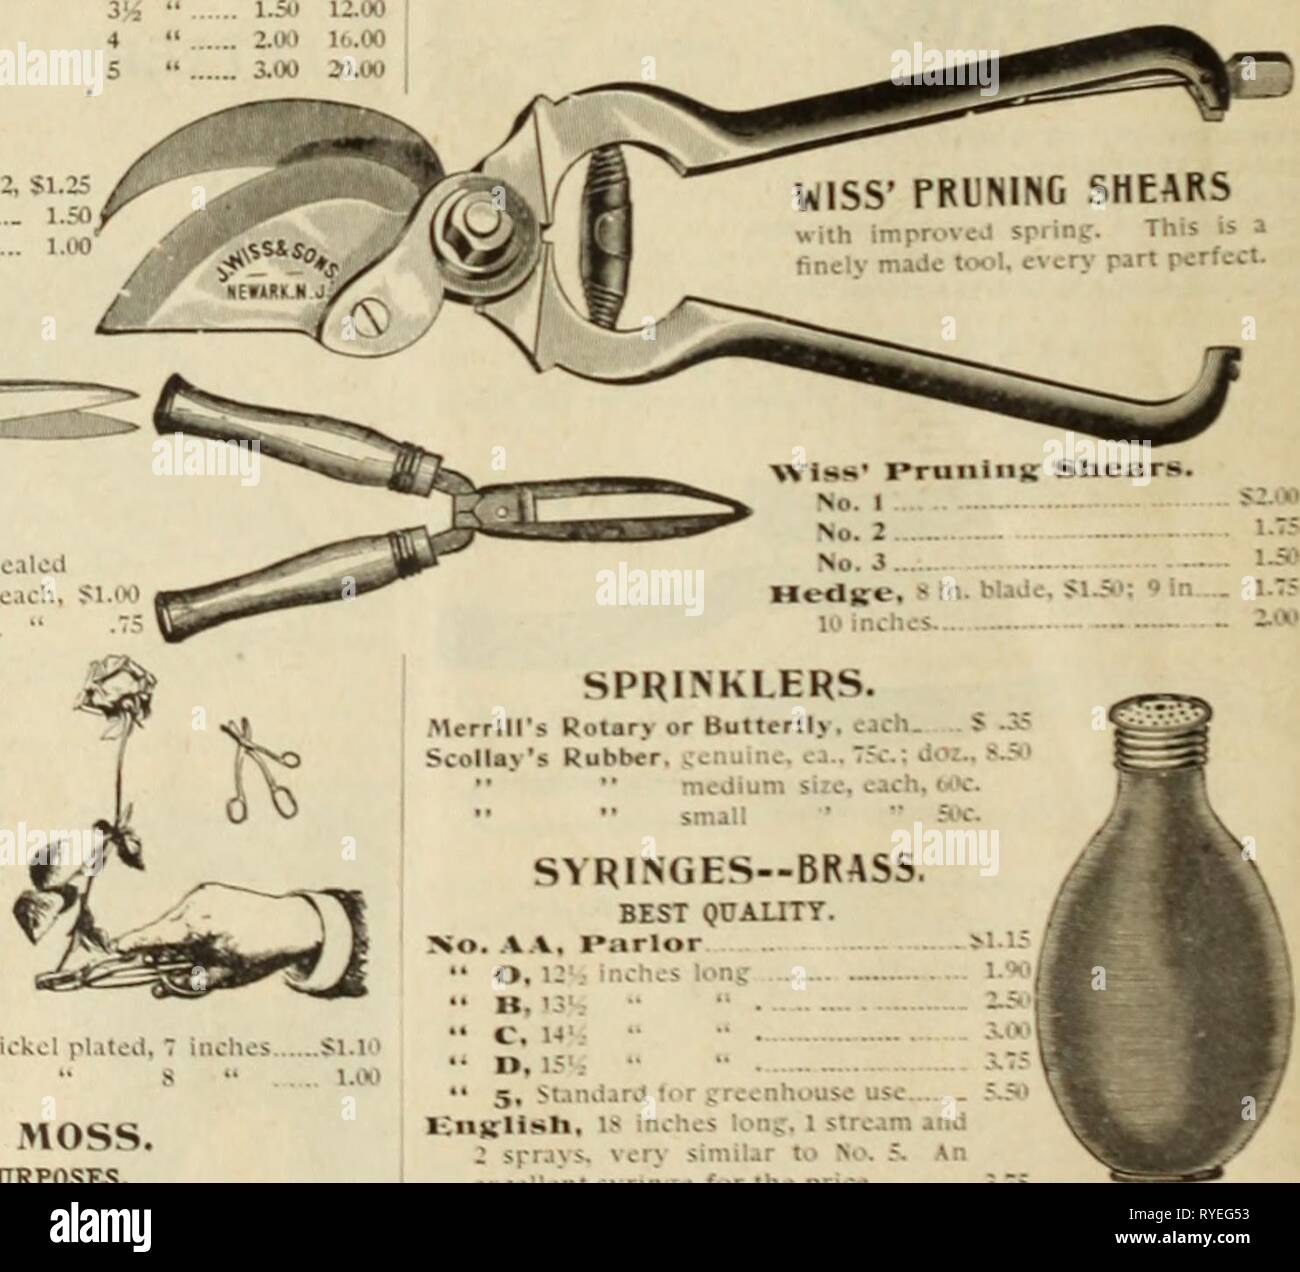 E.H. Hunt's catalogue : florists' seeds, supplies, bulbs  ehhuntscatalogue1896ehhu Year: 1896  Wire Shears, for cutting annealed    wire, toothpicks, etc Vine Scissors, Nickel plated The Barnes* Hose and Carnation Cutter, rhls is something entirely net* and is the most complete shear in the market. It is so arranged as to hold the Qowef after cutting, an extra lever being attached for the purpose, which can be used as required. This shear Is In- dispensable to Hose and Car- nation growers. Enameled. Si.25; Nickel, Si.50 FLOWER GATHERER, Nickel plated, 7 laches .. $1.10 •« « 8 ' 1.00 SPHAGNUM M Stock Photo